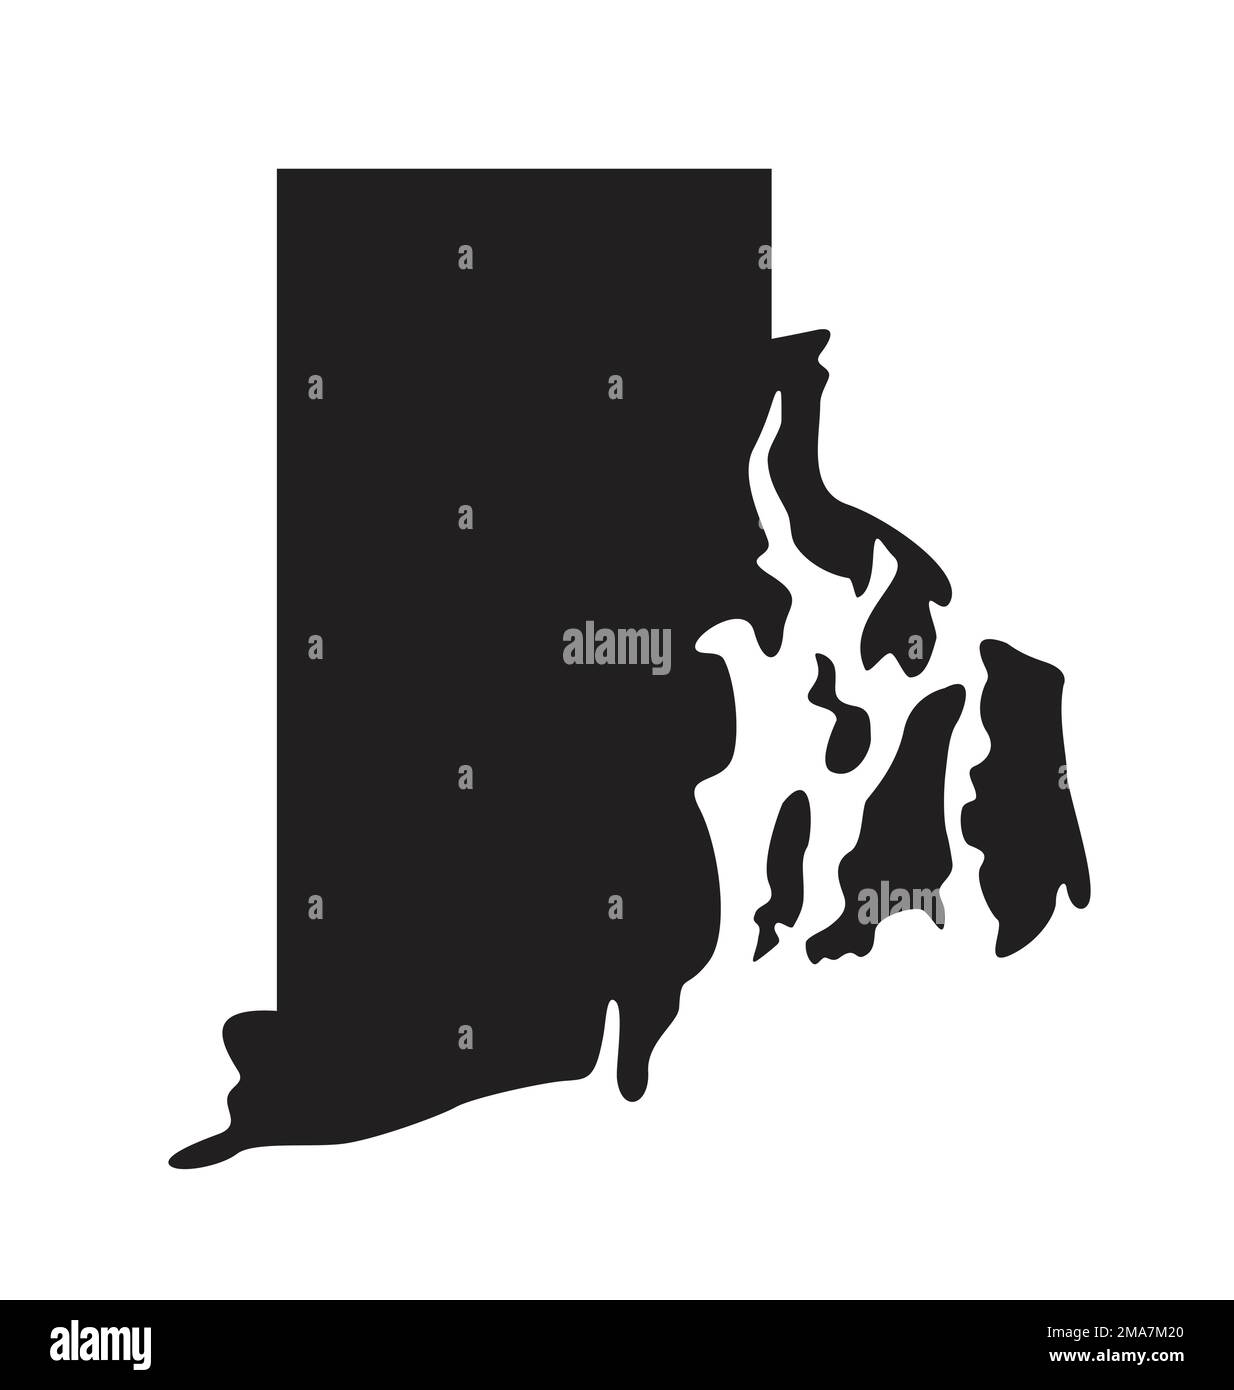 rhode island ri state shape map silhouette outline simplified USA vector isolated on white background Stock Vector